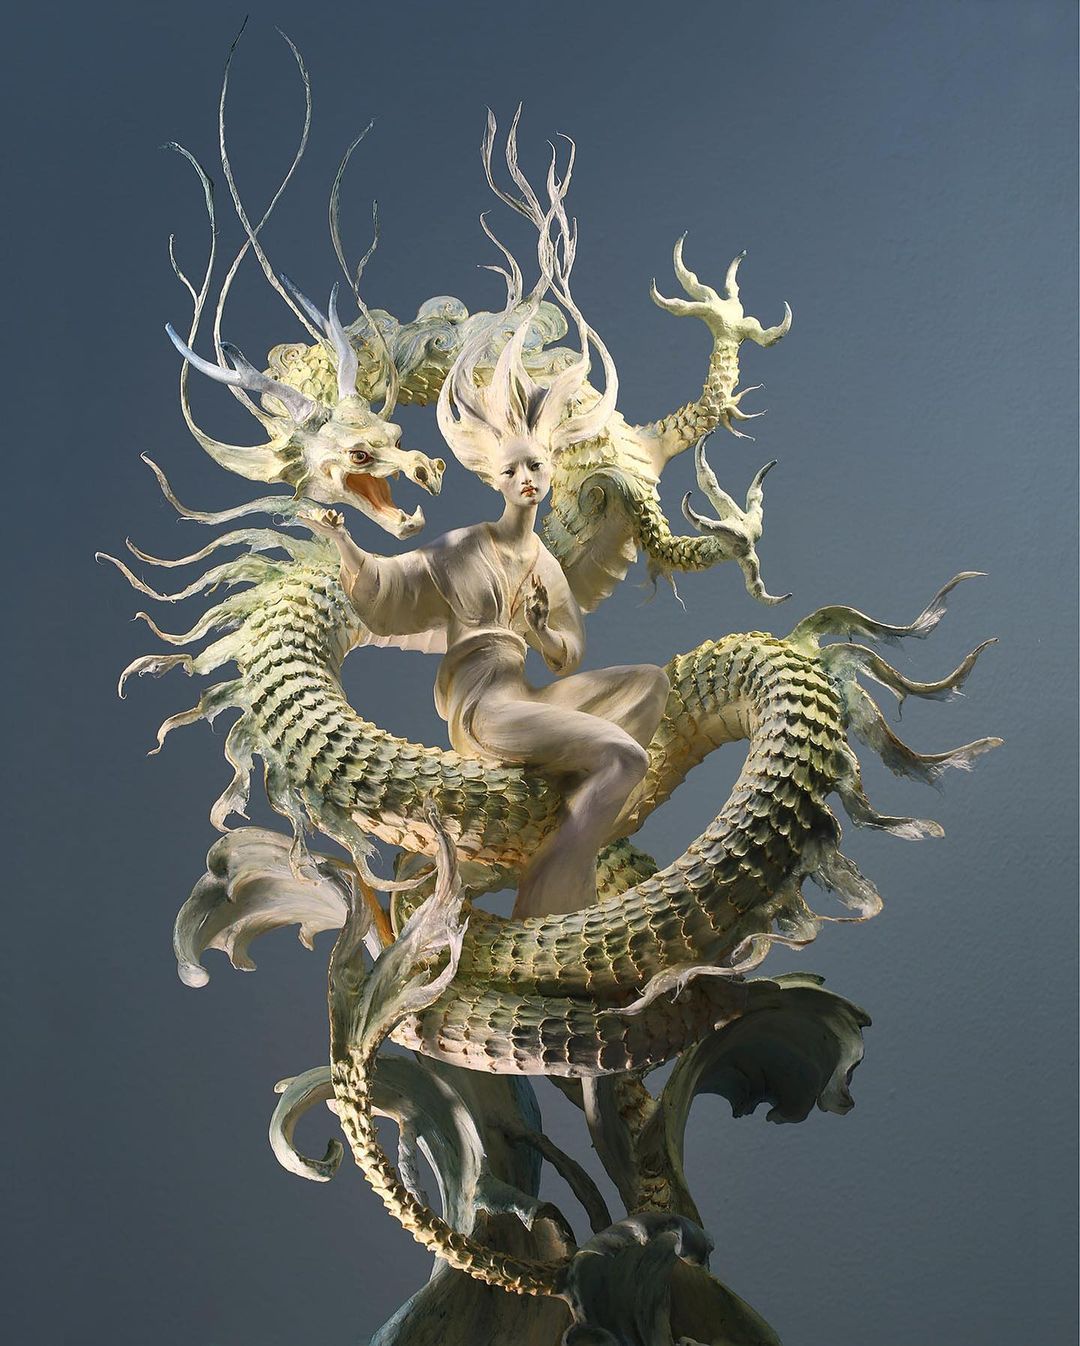 Magical Surreal And Allegorical Sculptures Of Fantastical Beings By Forest Rogers 12